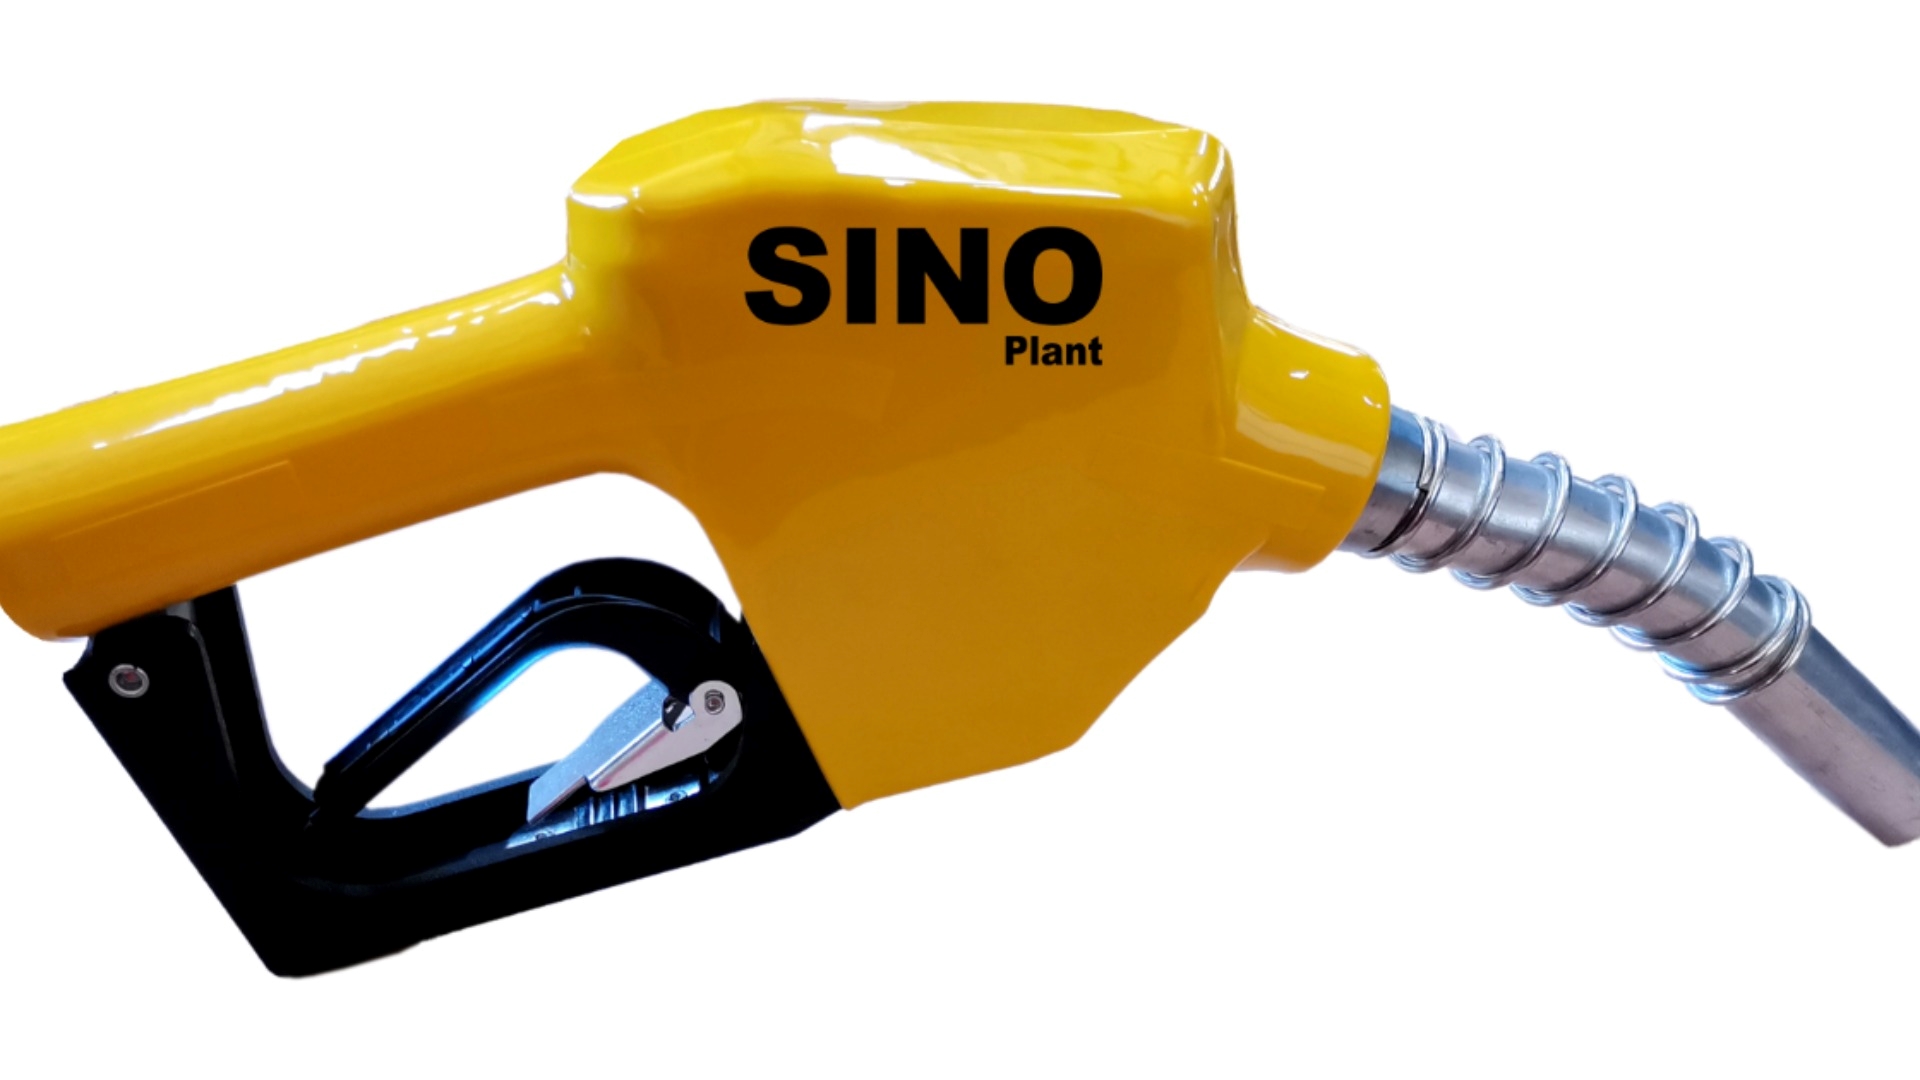 Sino Plant Fuel pumps Fuel Nozzle Manual Stop ¾" / 19mm 2024 for sale by Sino Plant | Truck & Trailer Marketplace